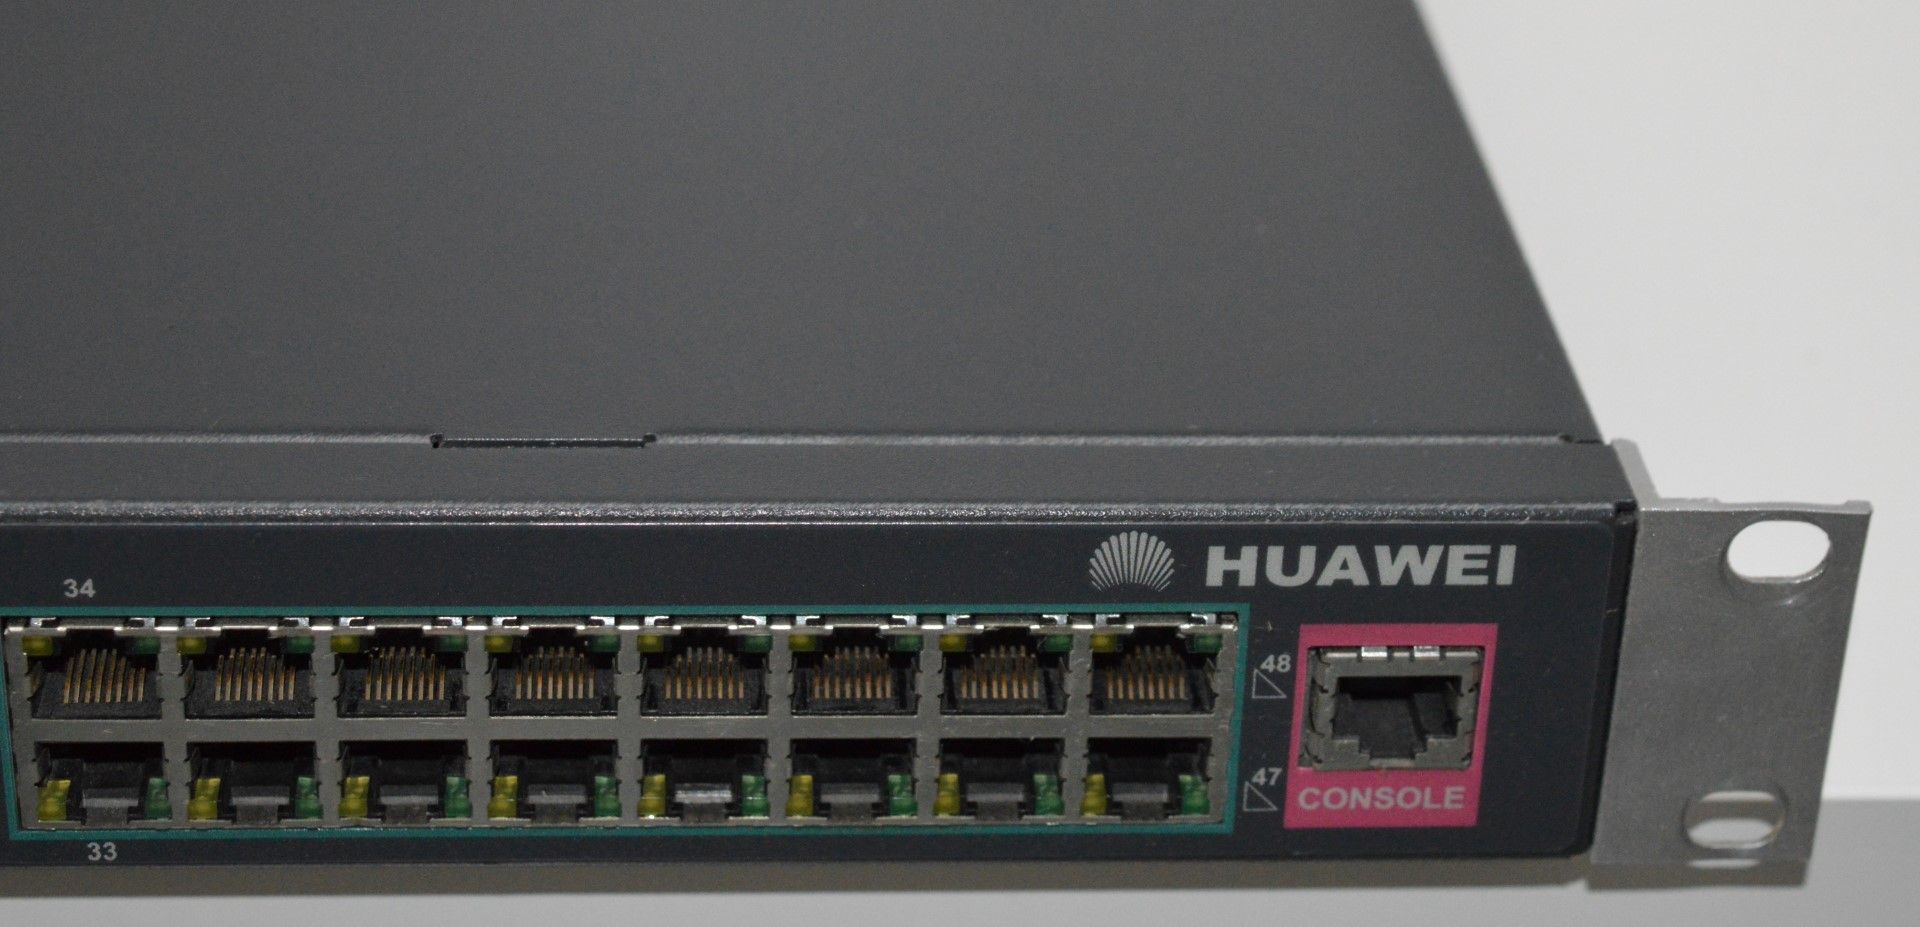 1 x Huawei Quidway S3050 Series Switch - CL300 - Ref PC002 - Location: Altrincham WA14 - Image 2 of 5